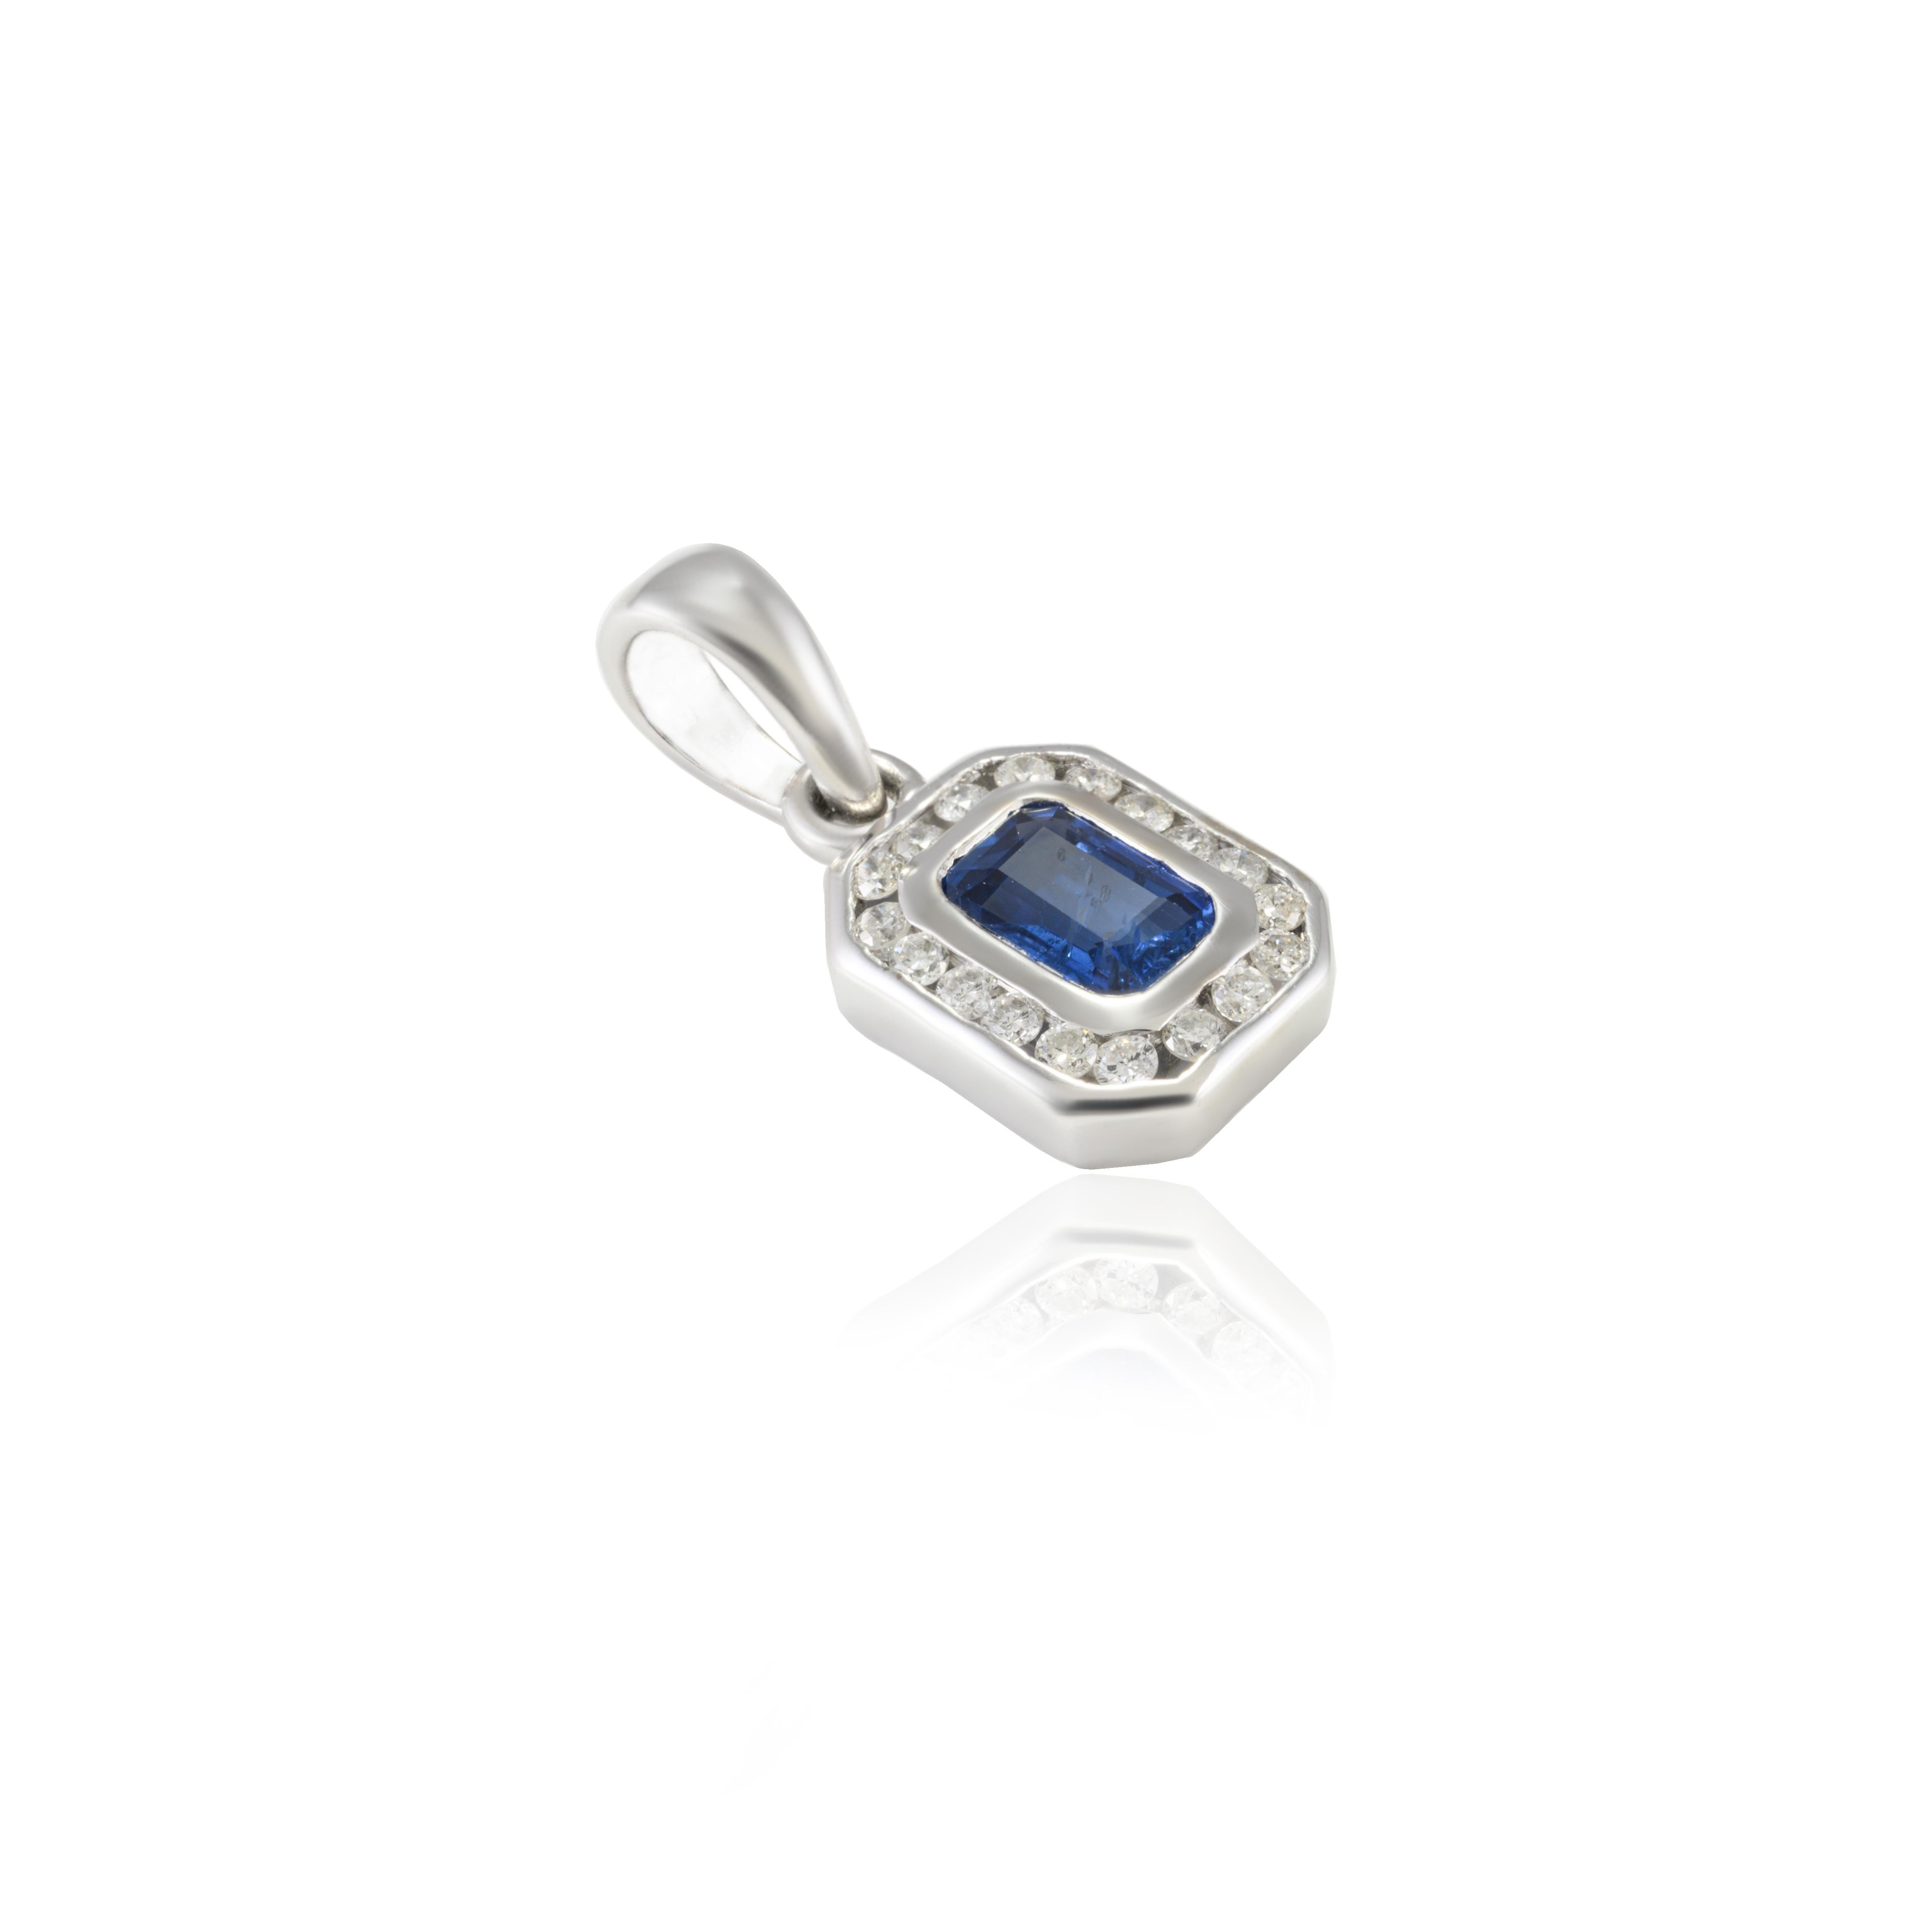 Octagon Blue Sapphire and Diamond Halo Pendant in 14K Gold studded with octagon cut blue sapphire. This stunning piece of jewelry instantly elevates a casual look or dressy outfit. 
Sapphire stimulates concentration and reduces stress.
Designed with